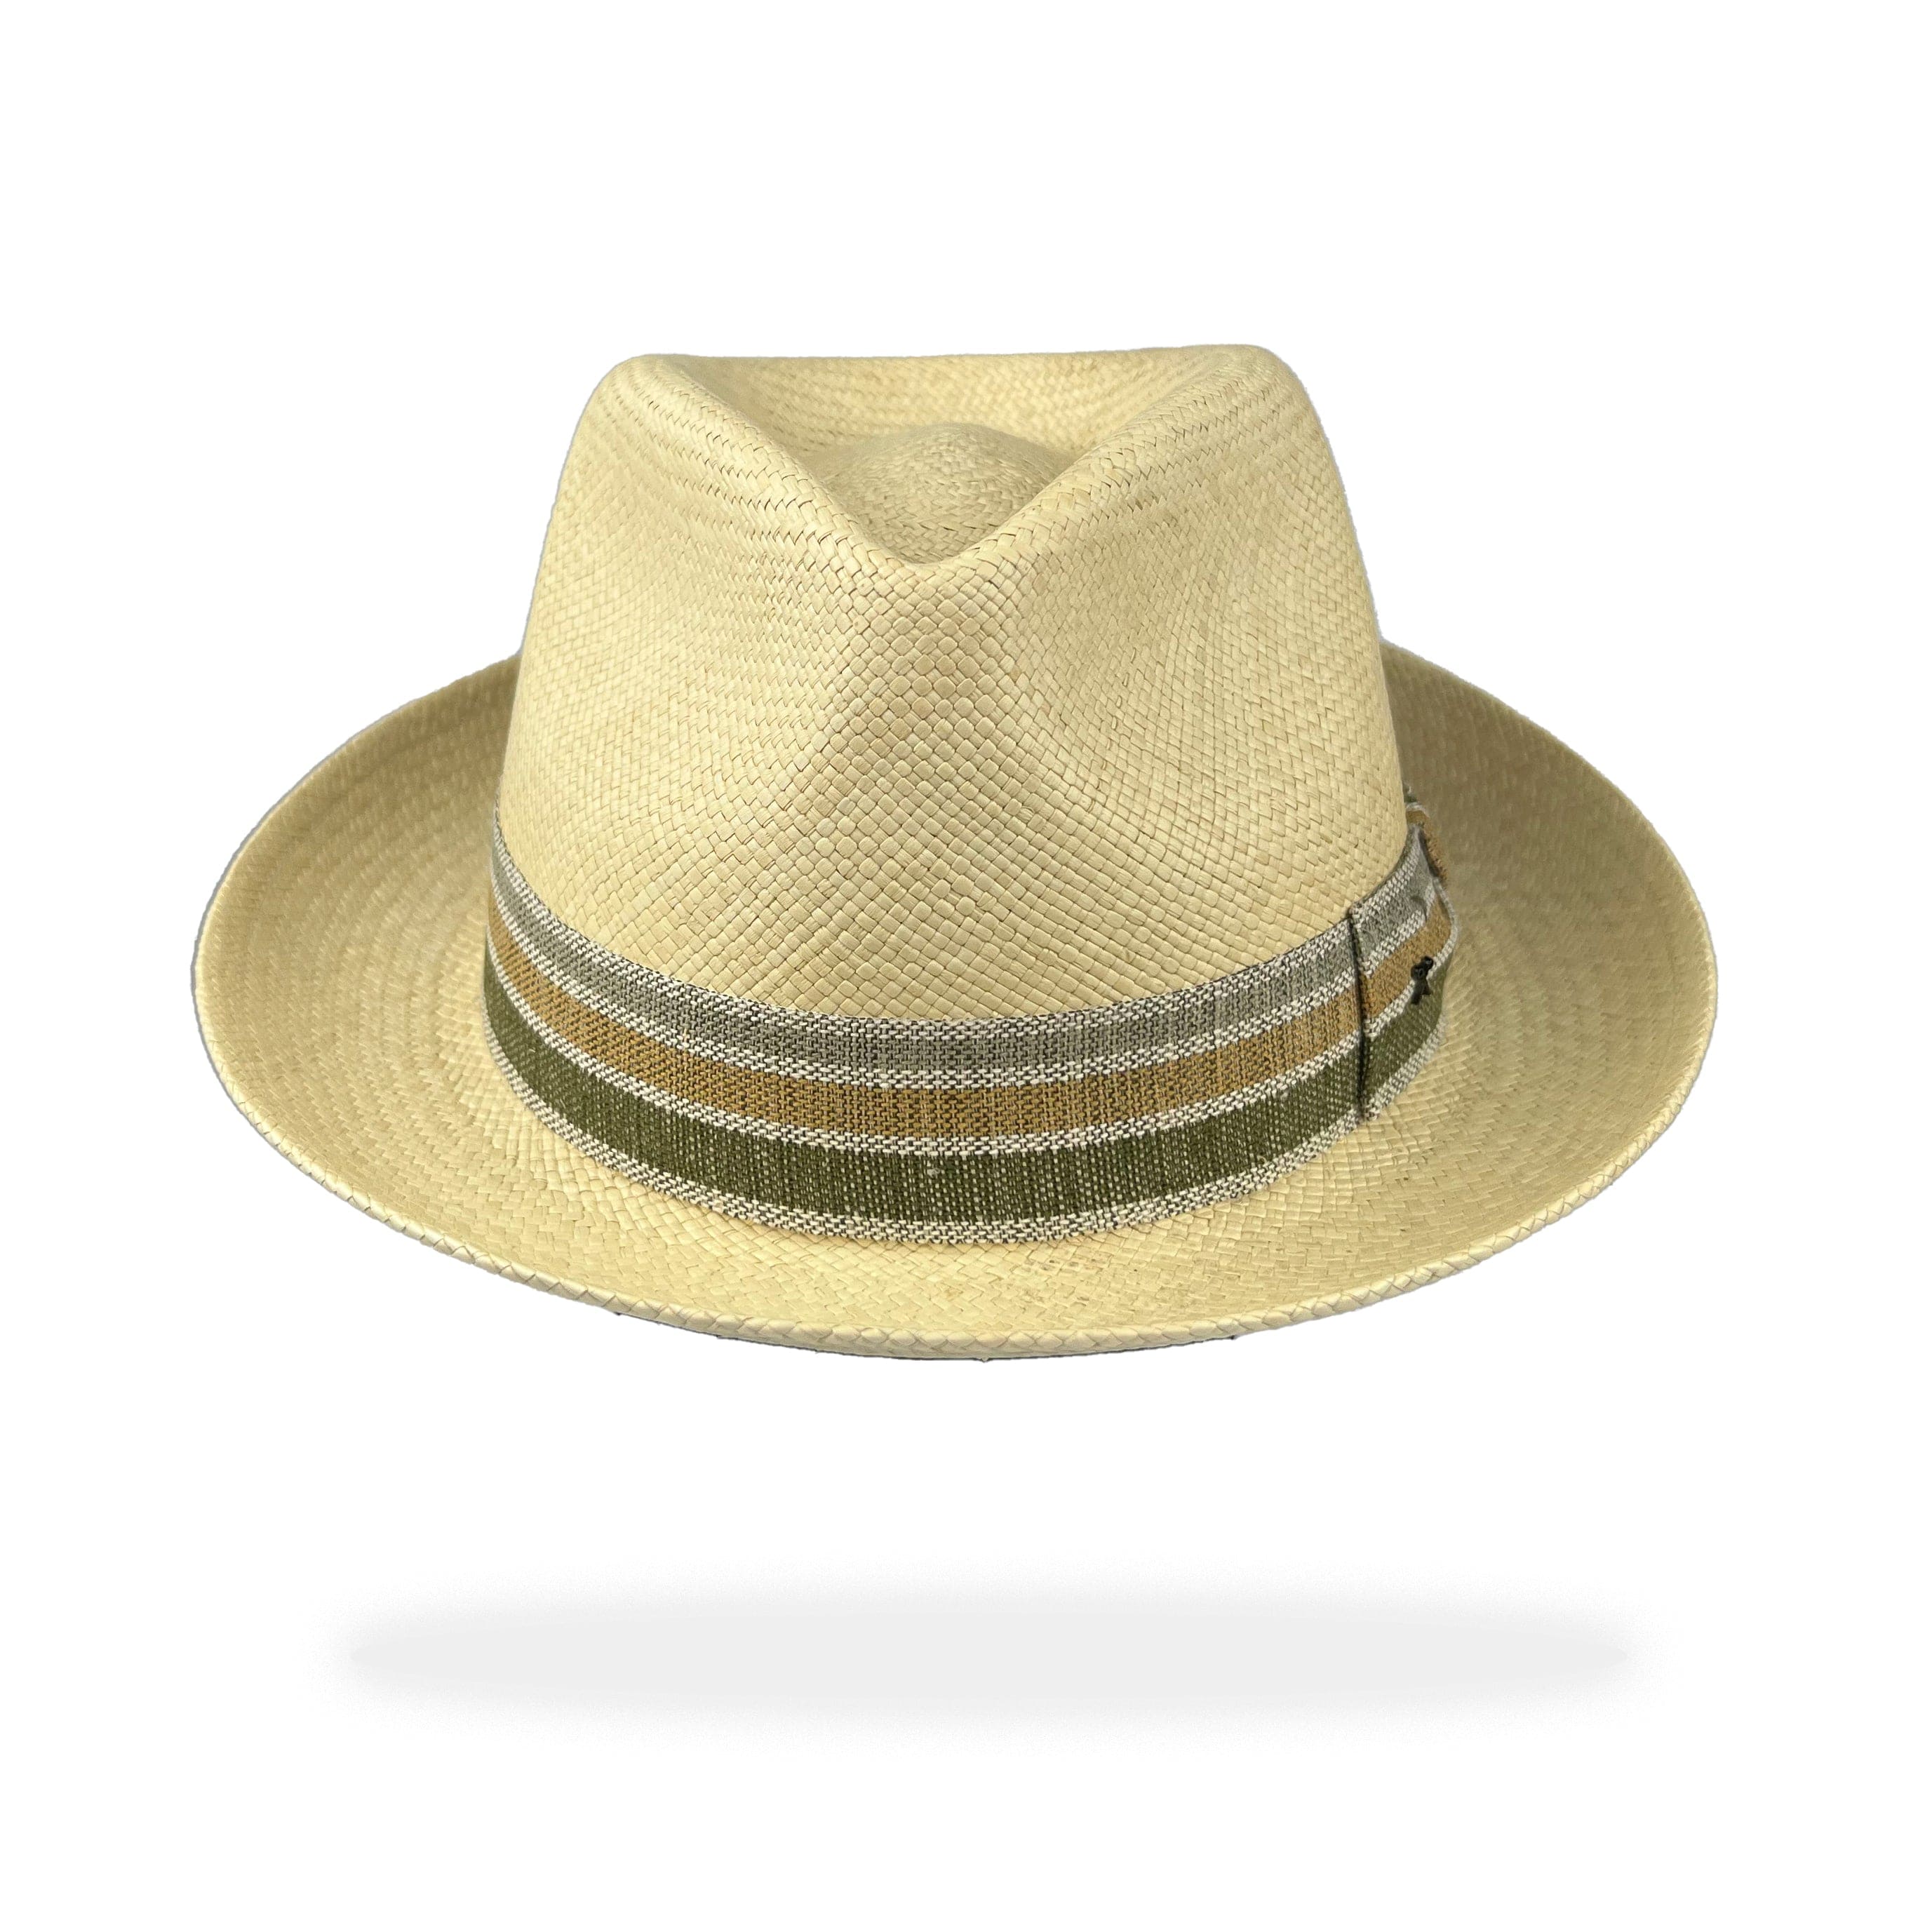 Unisex | Trilby Panama Hat | Natural Toquilla | Grey Olive Beige Band | Made in Italy